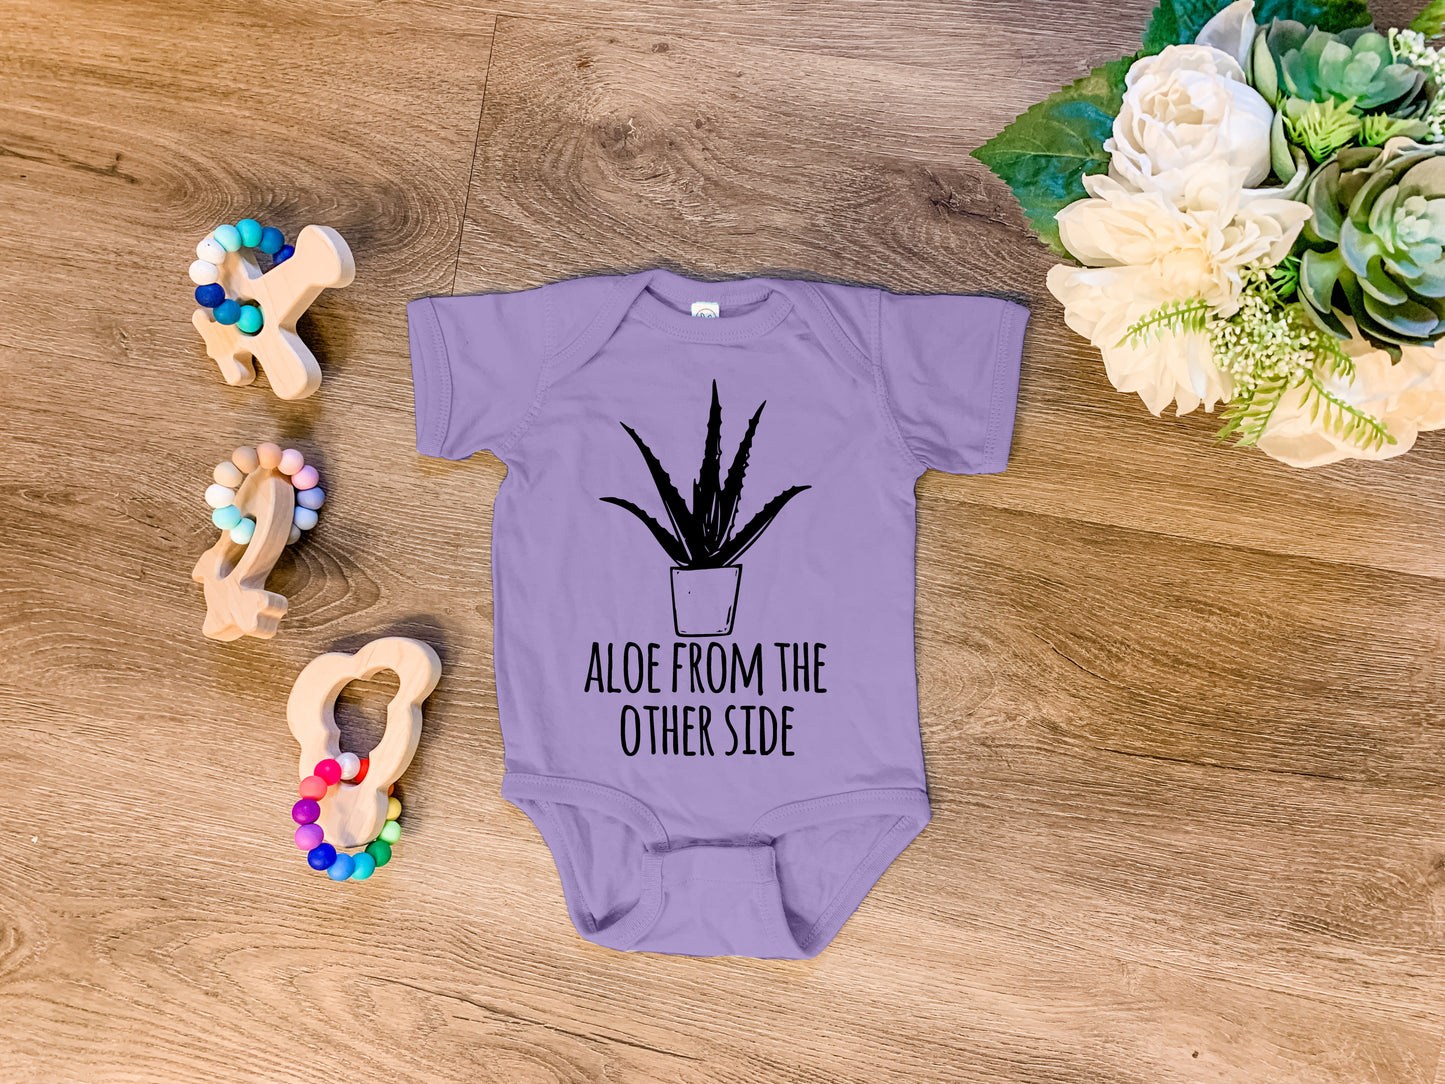 Aloe From The Other Side - Onesie - Heather Gray, Chill, or Lavender